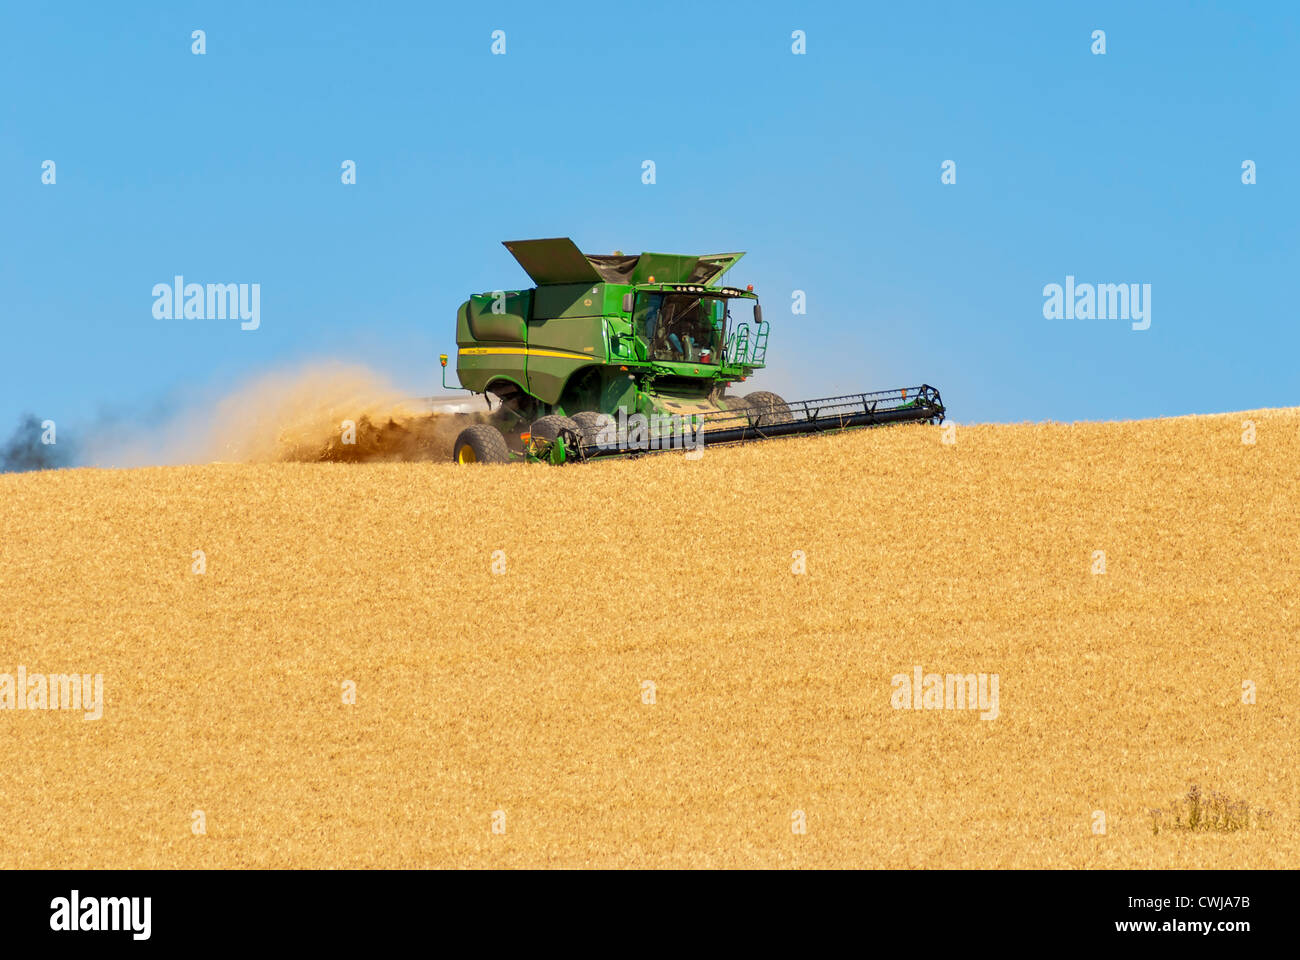 Combine harvesting in a field of golden wheat Stock Photo